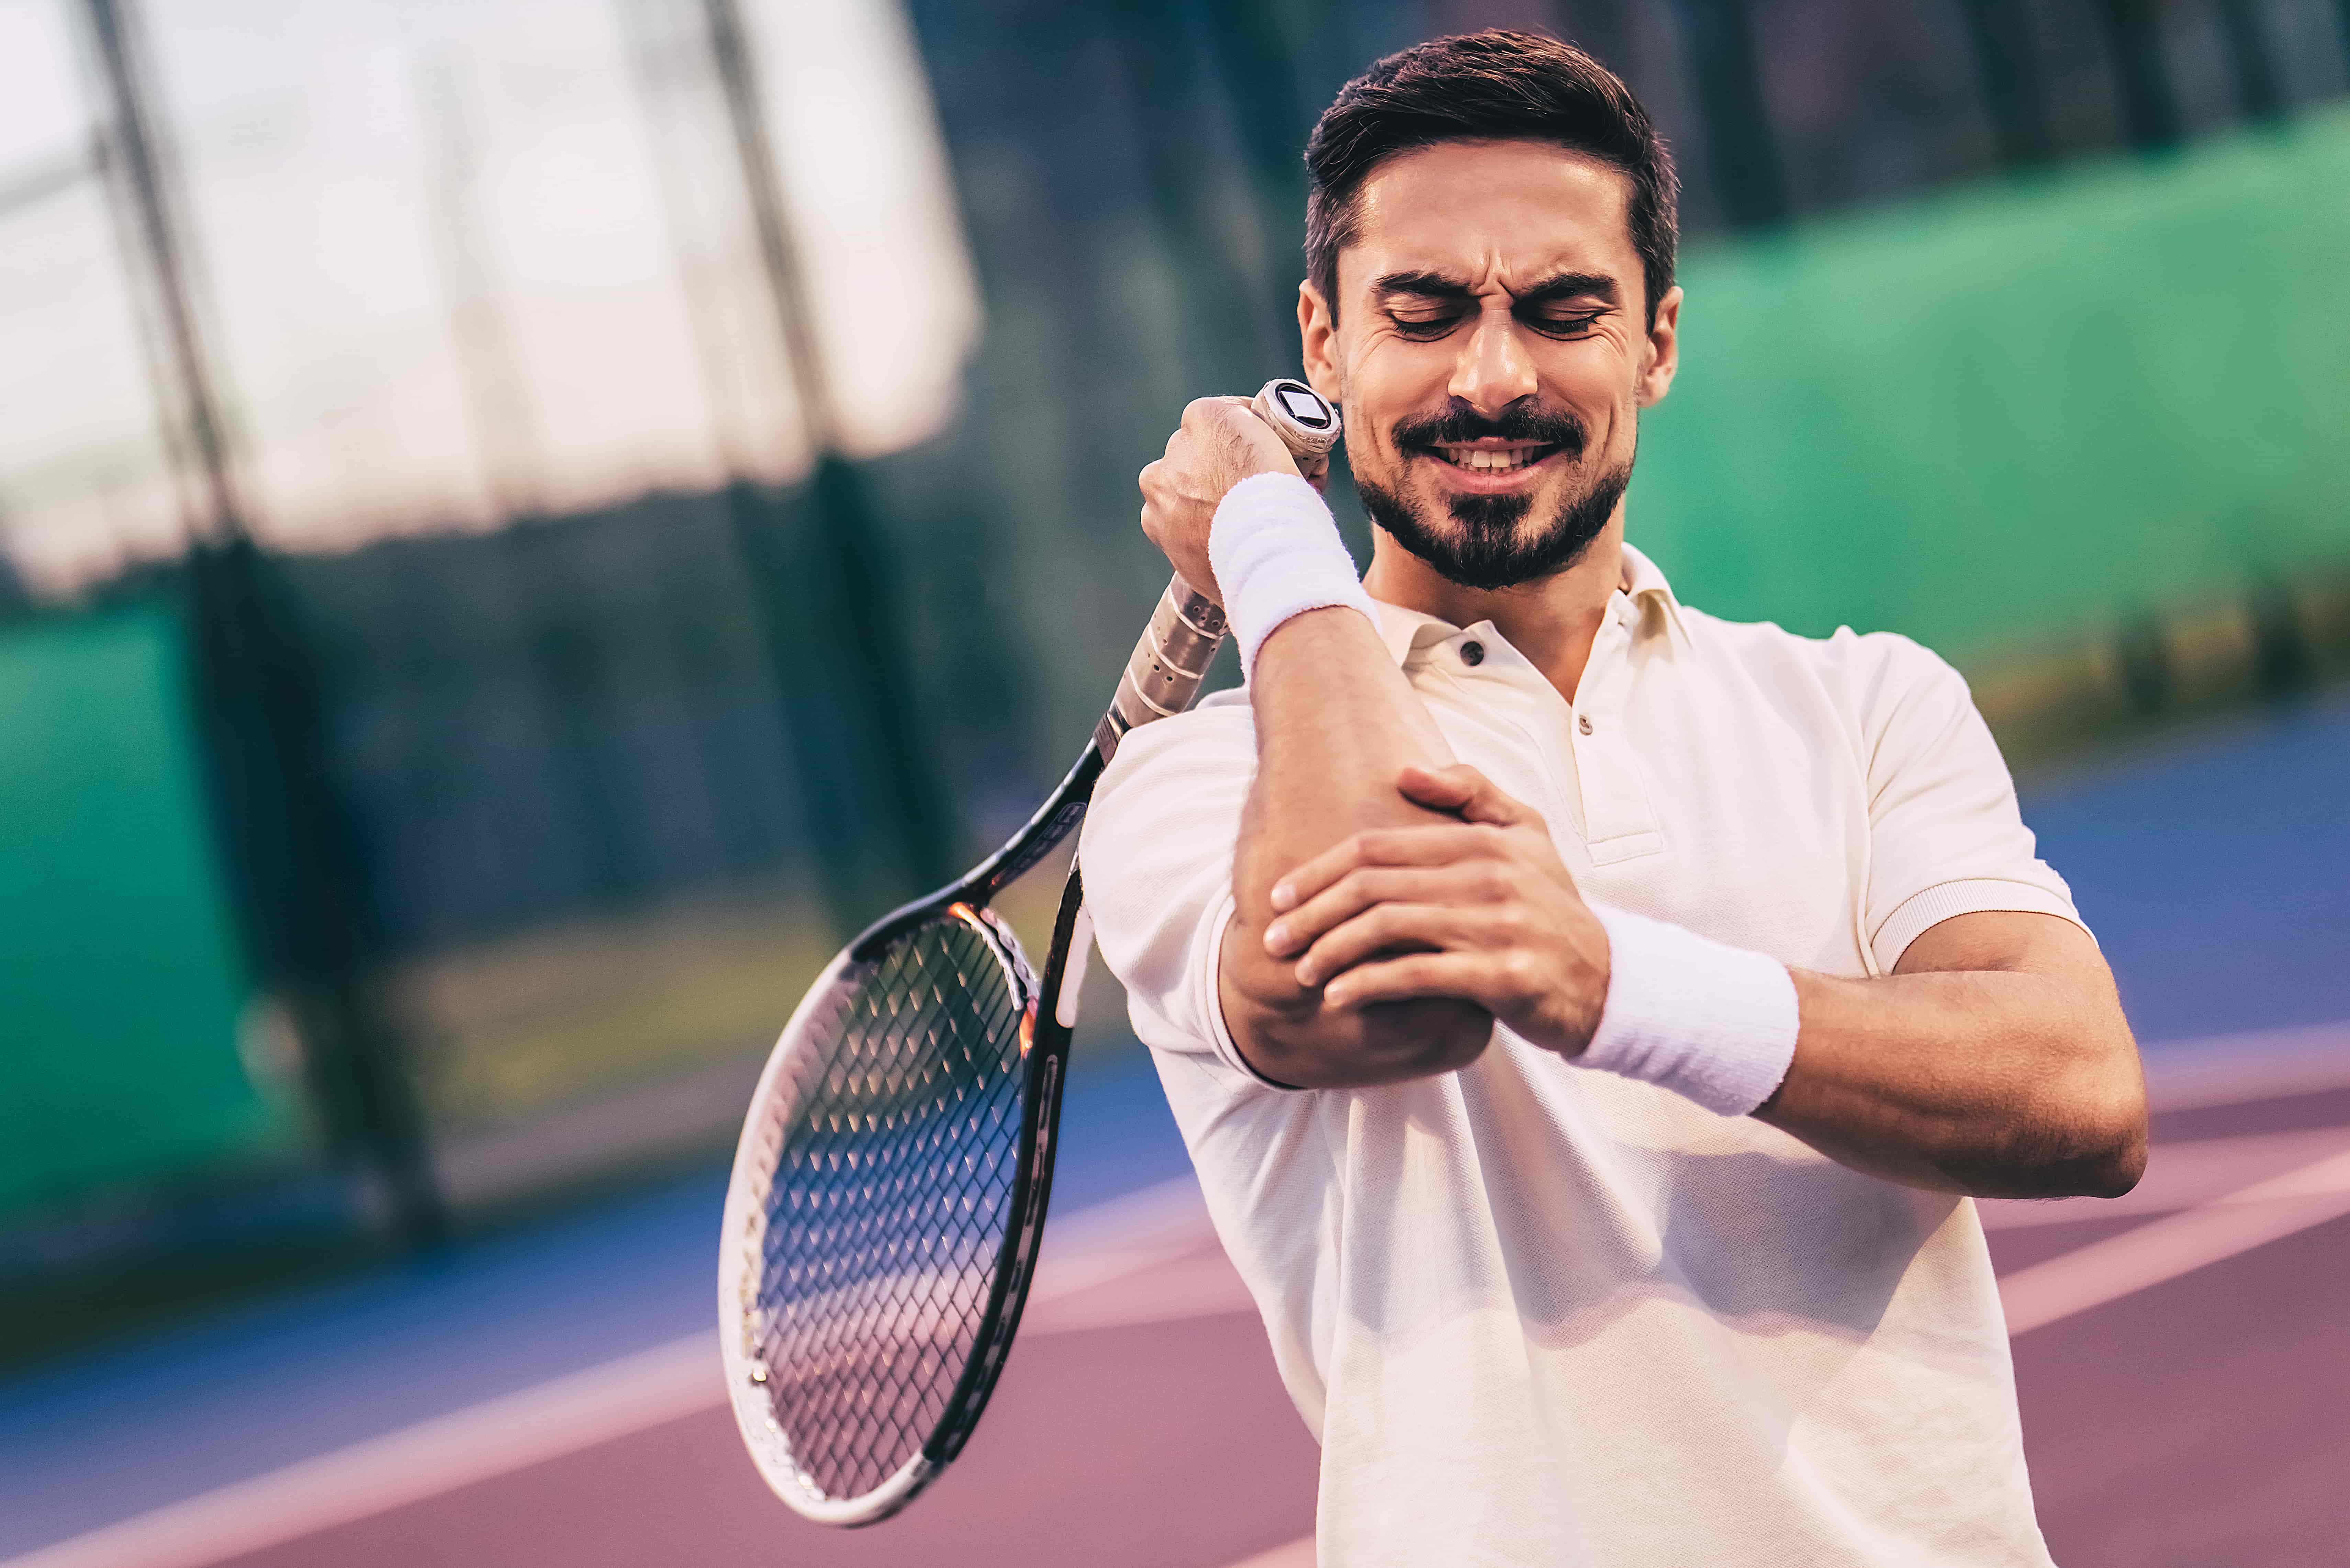 How can a tennis player develop pain around the elbow?